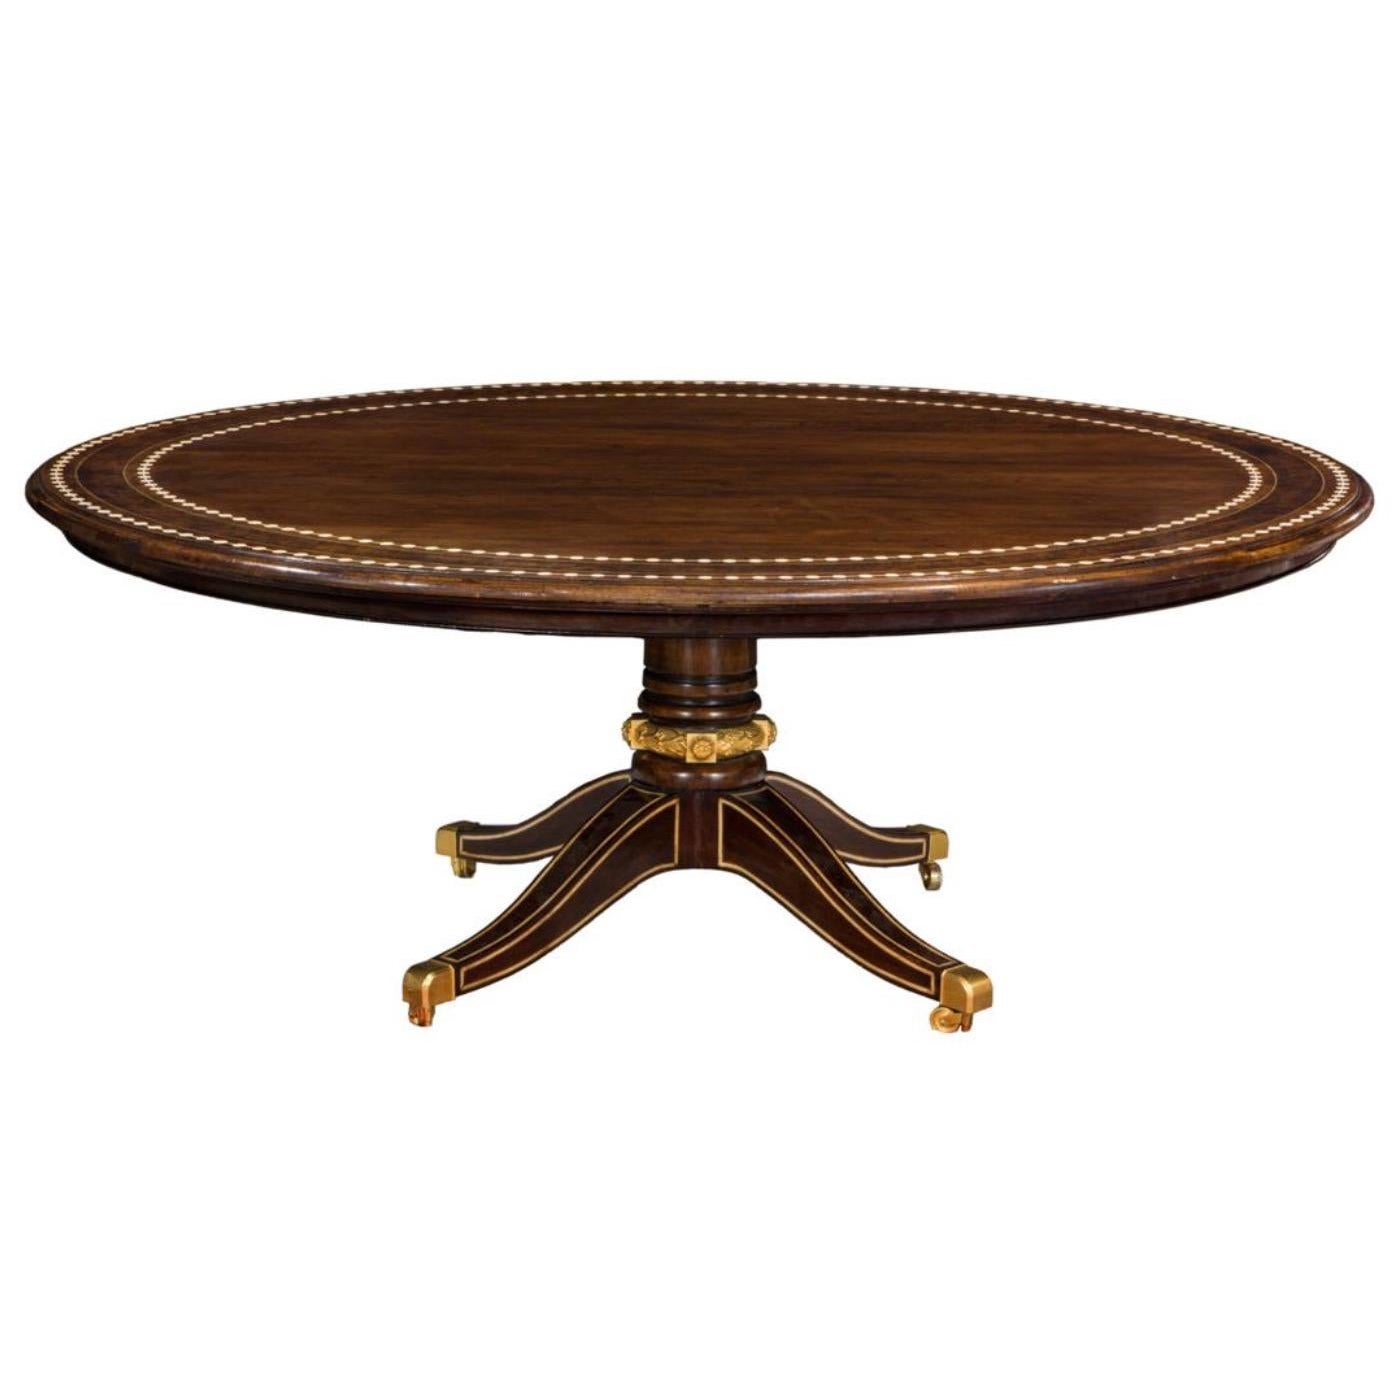 Walnut & Oak Dining Table with Inlays, gilded bronze ring, after George Bullock